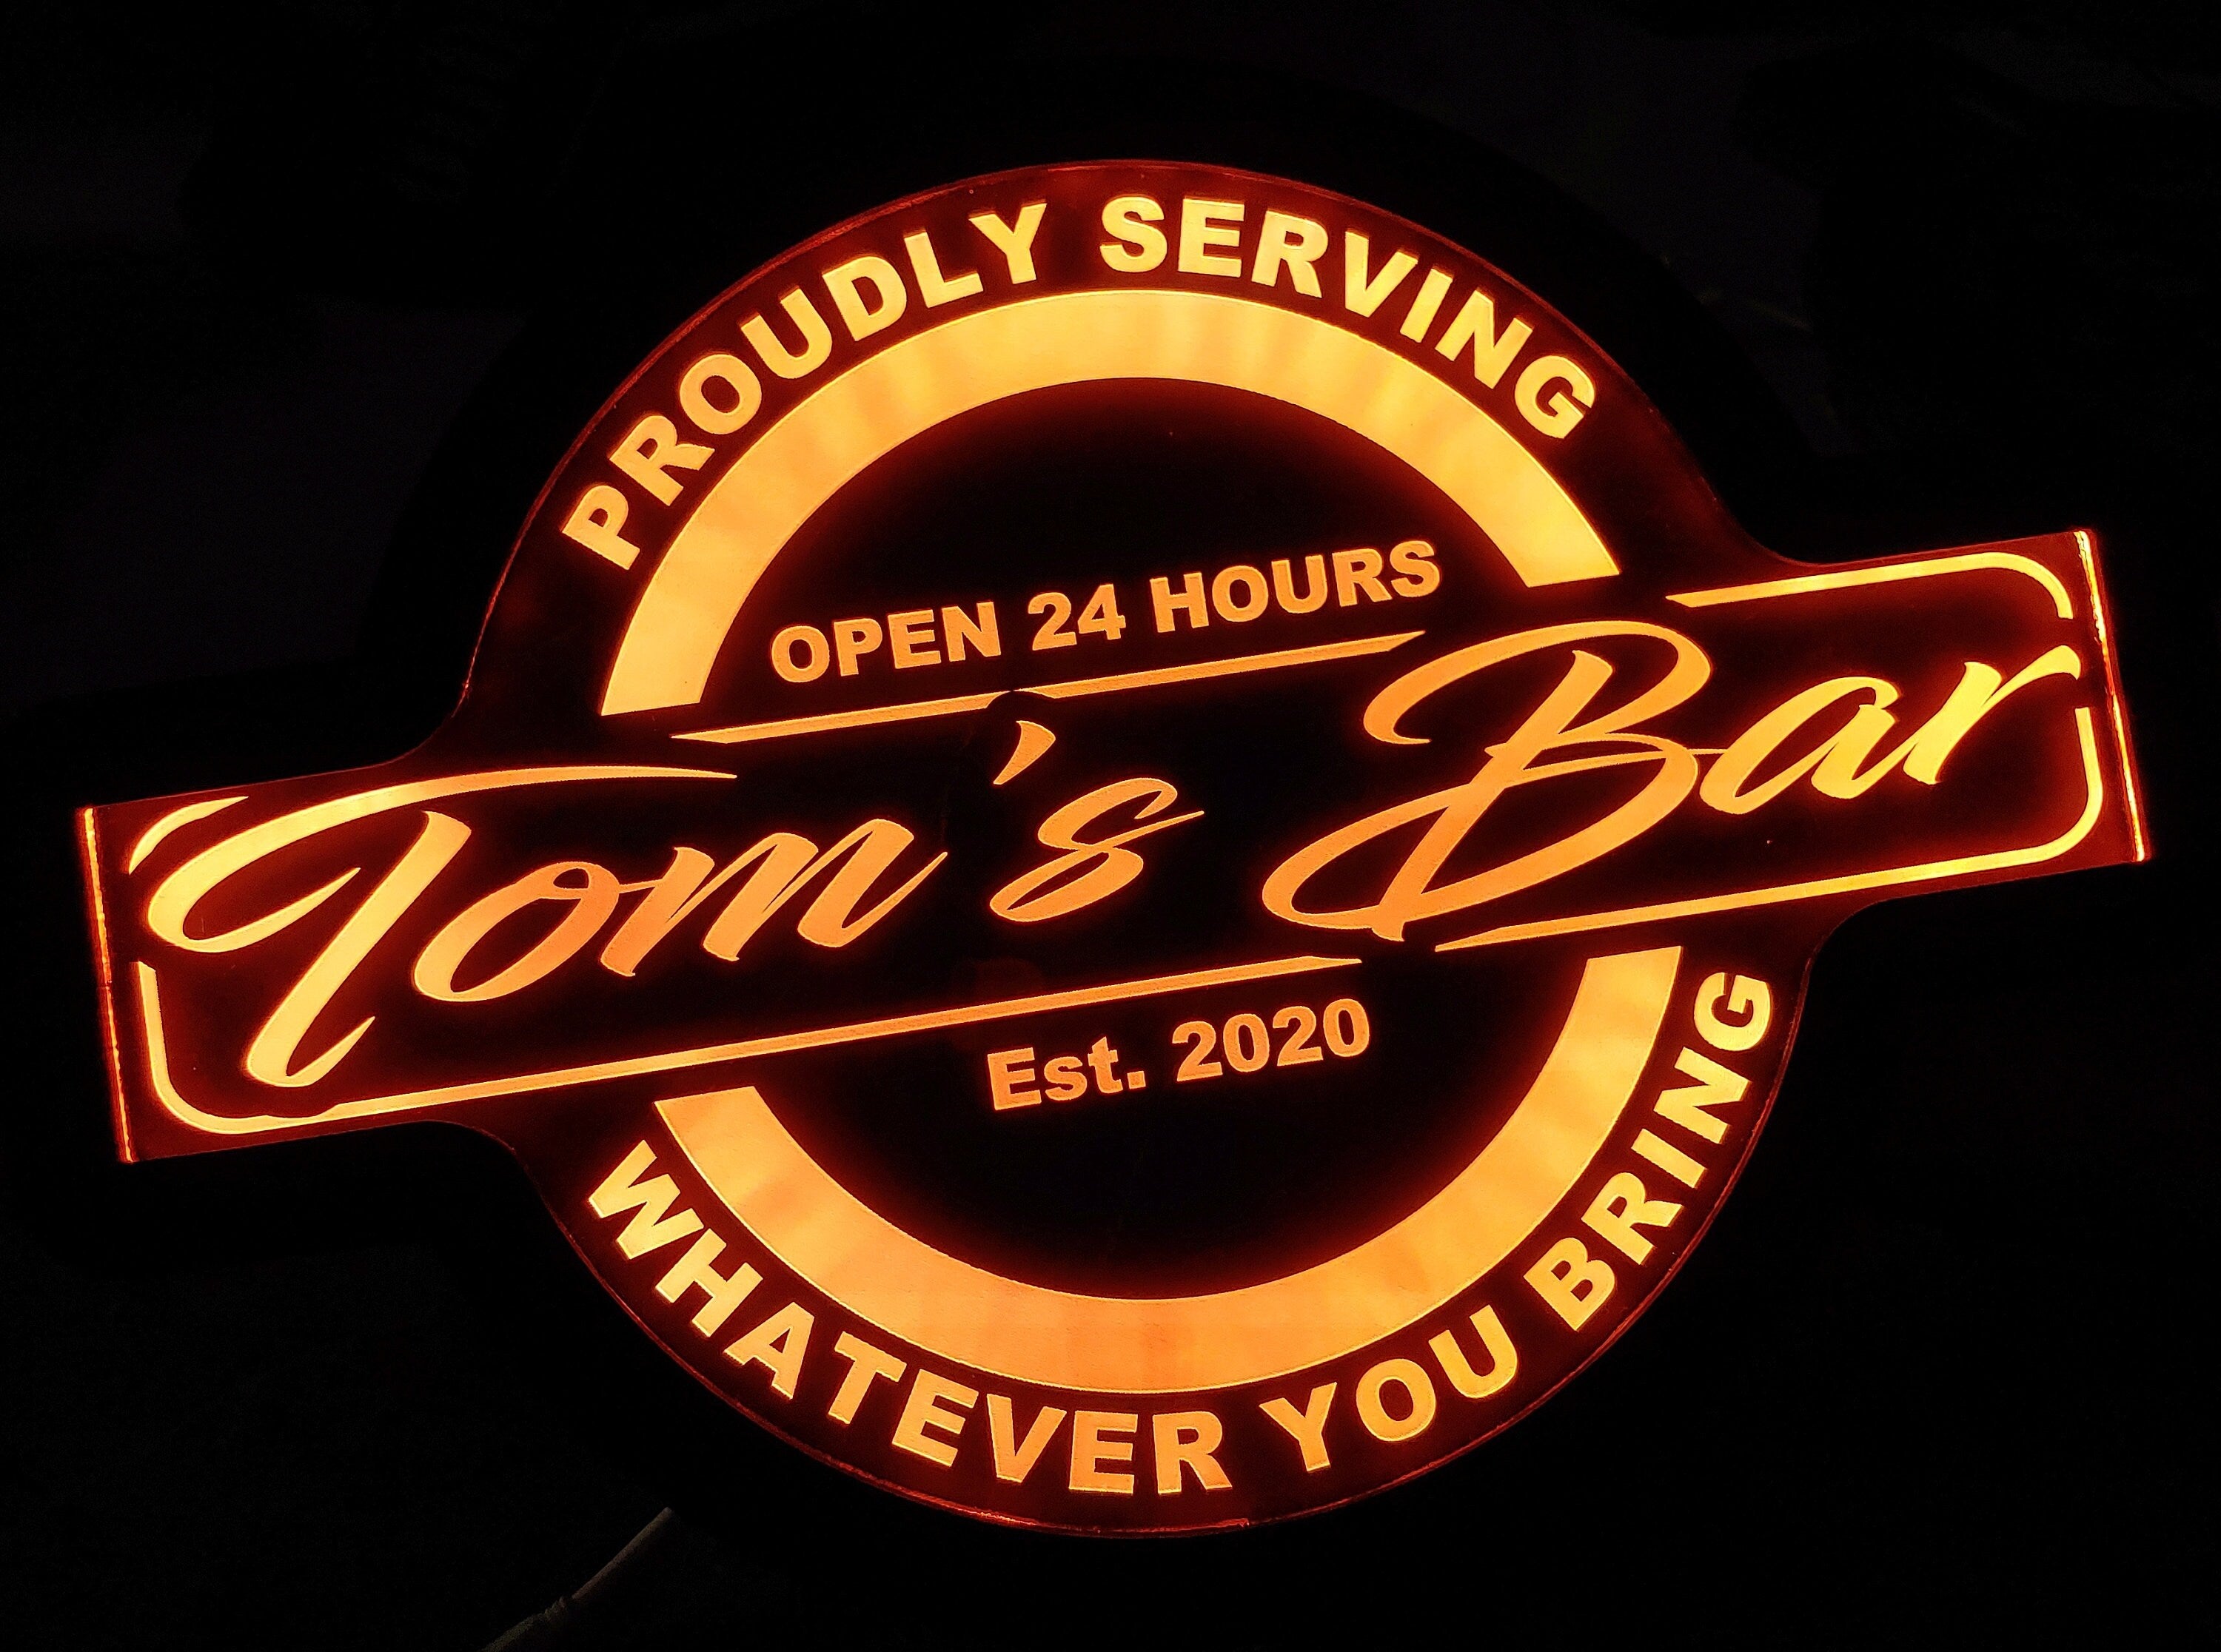 Custom Open Bar Led Wall Sign Neon Like - Color Changing Remote Control - 4 Sizes Free Shipping